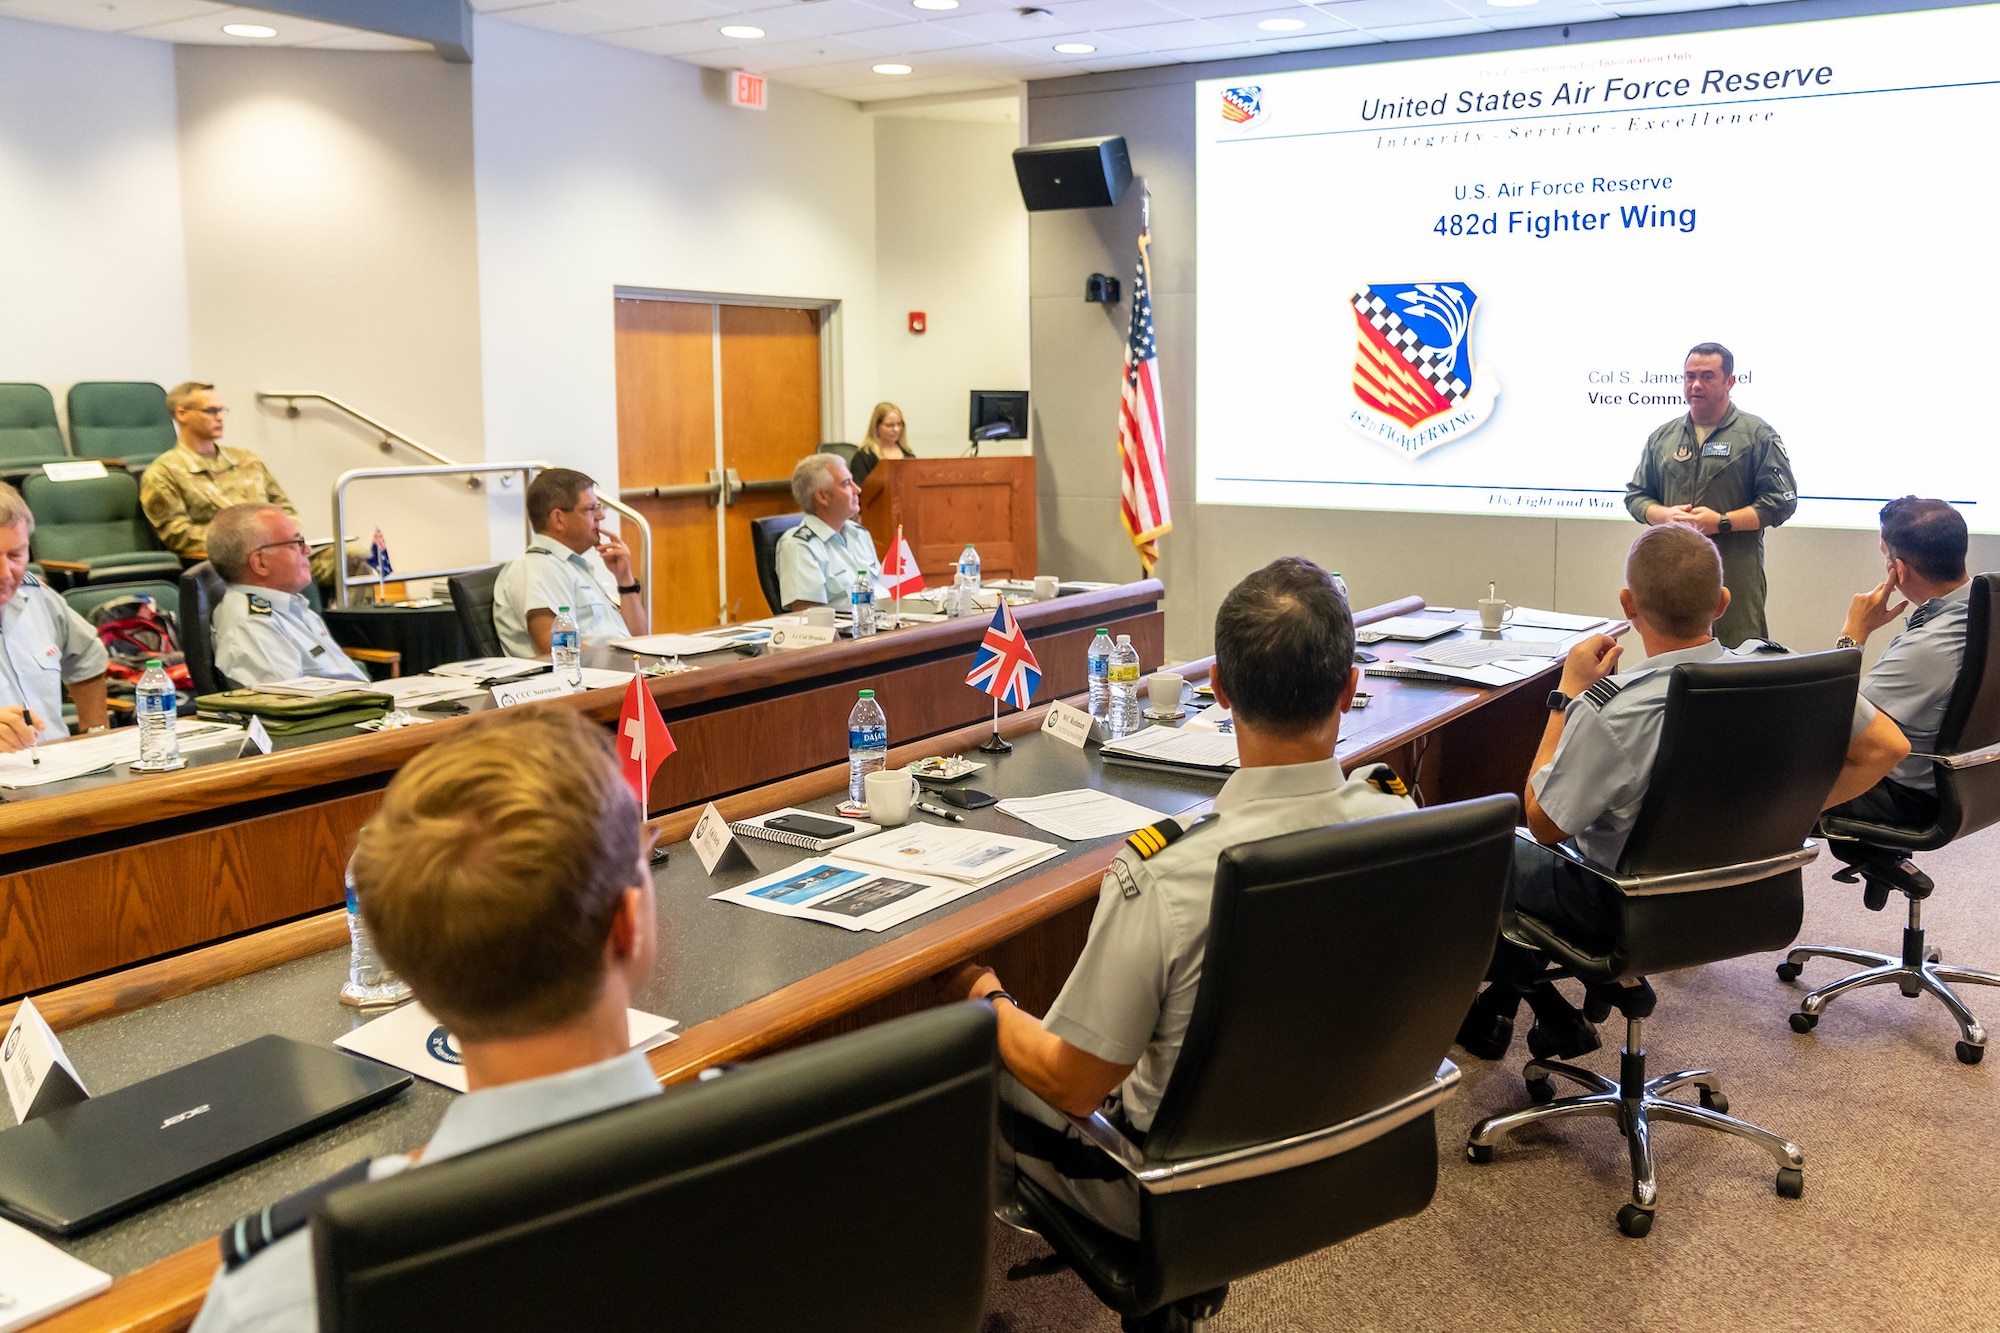 Col. S. James Frickel, 482nd Fighter Wing Vice Commander, gives a mission brief to the representatives during the 26th annual International Air Reserve Symposium September 14, 2022 at Homestead Air Reserve Base, Florida. (U.S. Air Force photo by Tech. Sgt. Lionel Castellano)